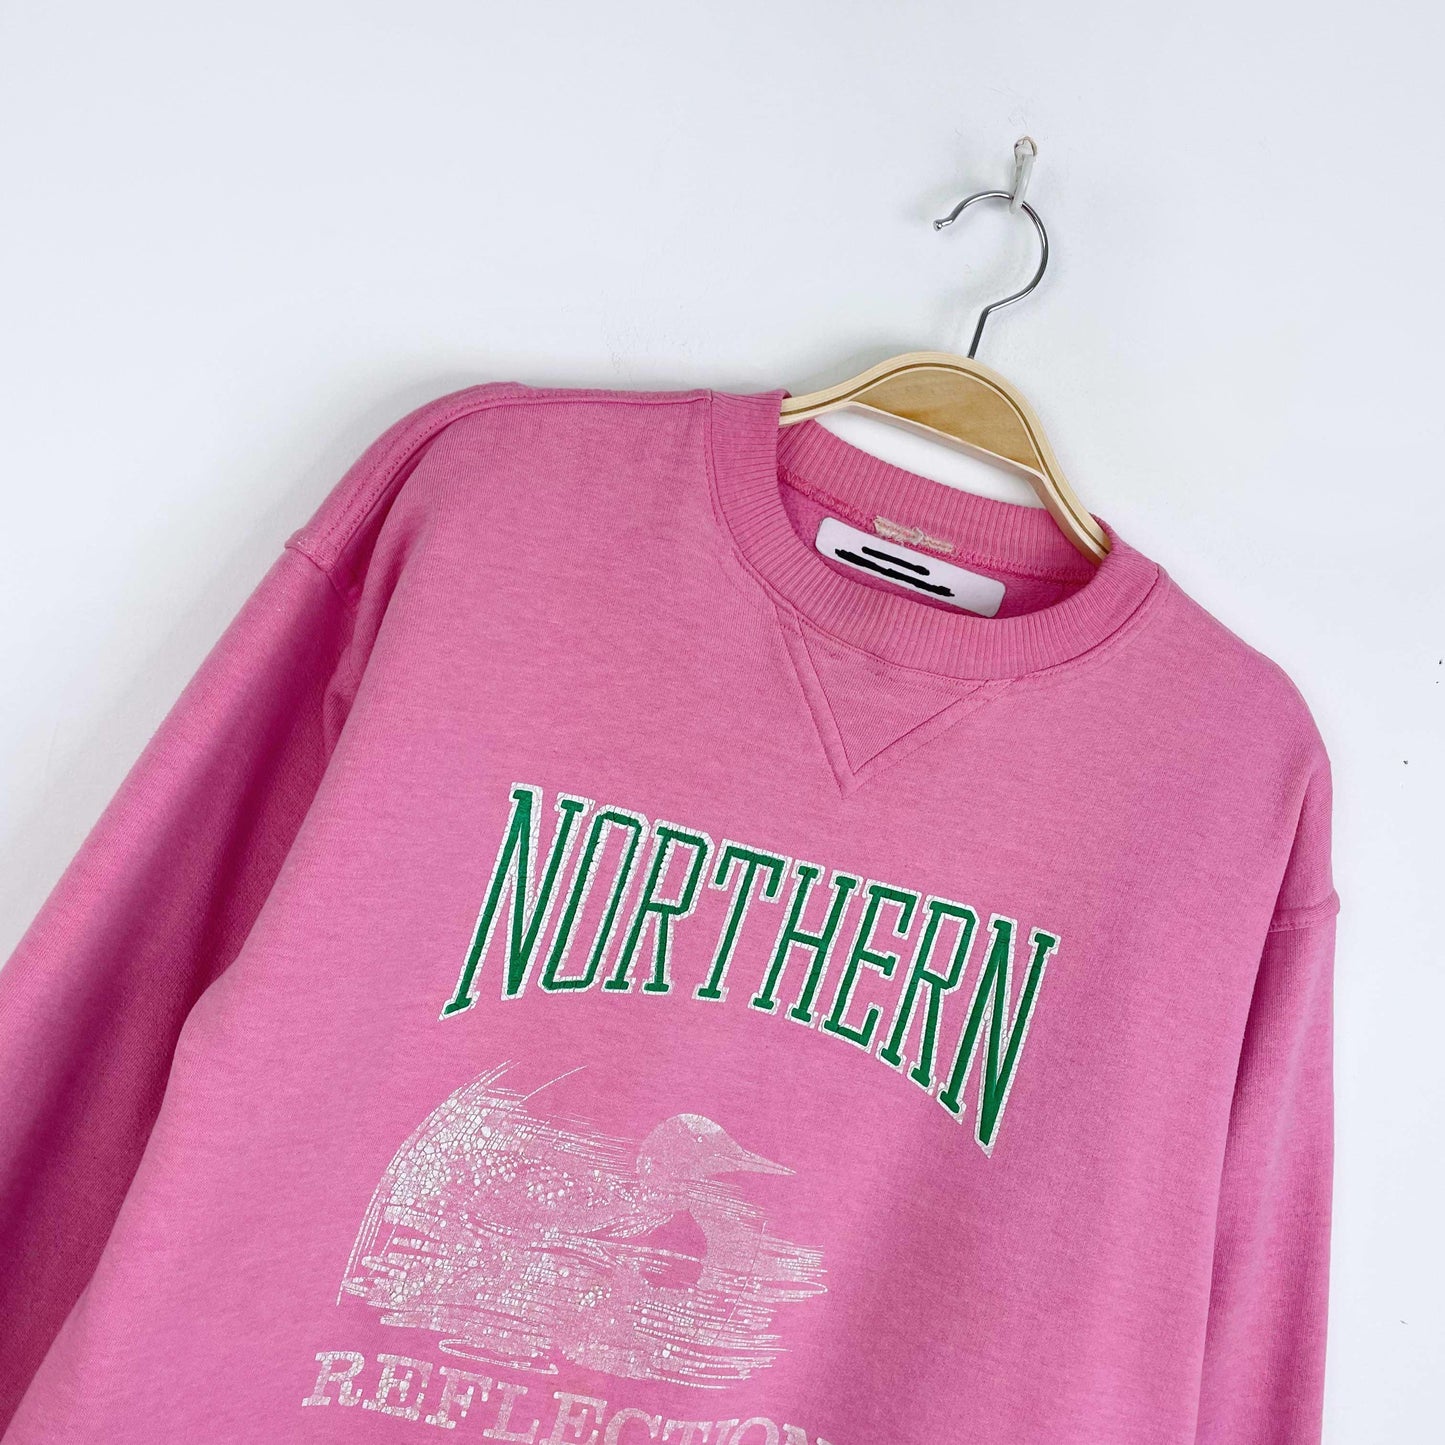 vintage 90s northern reflections pink loon logo crew